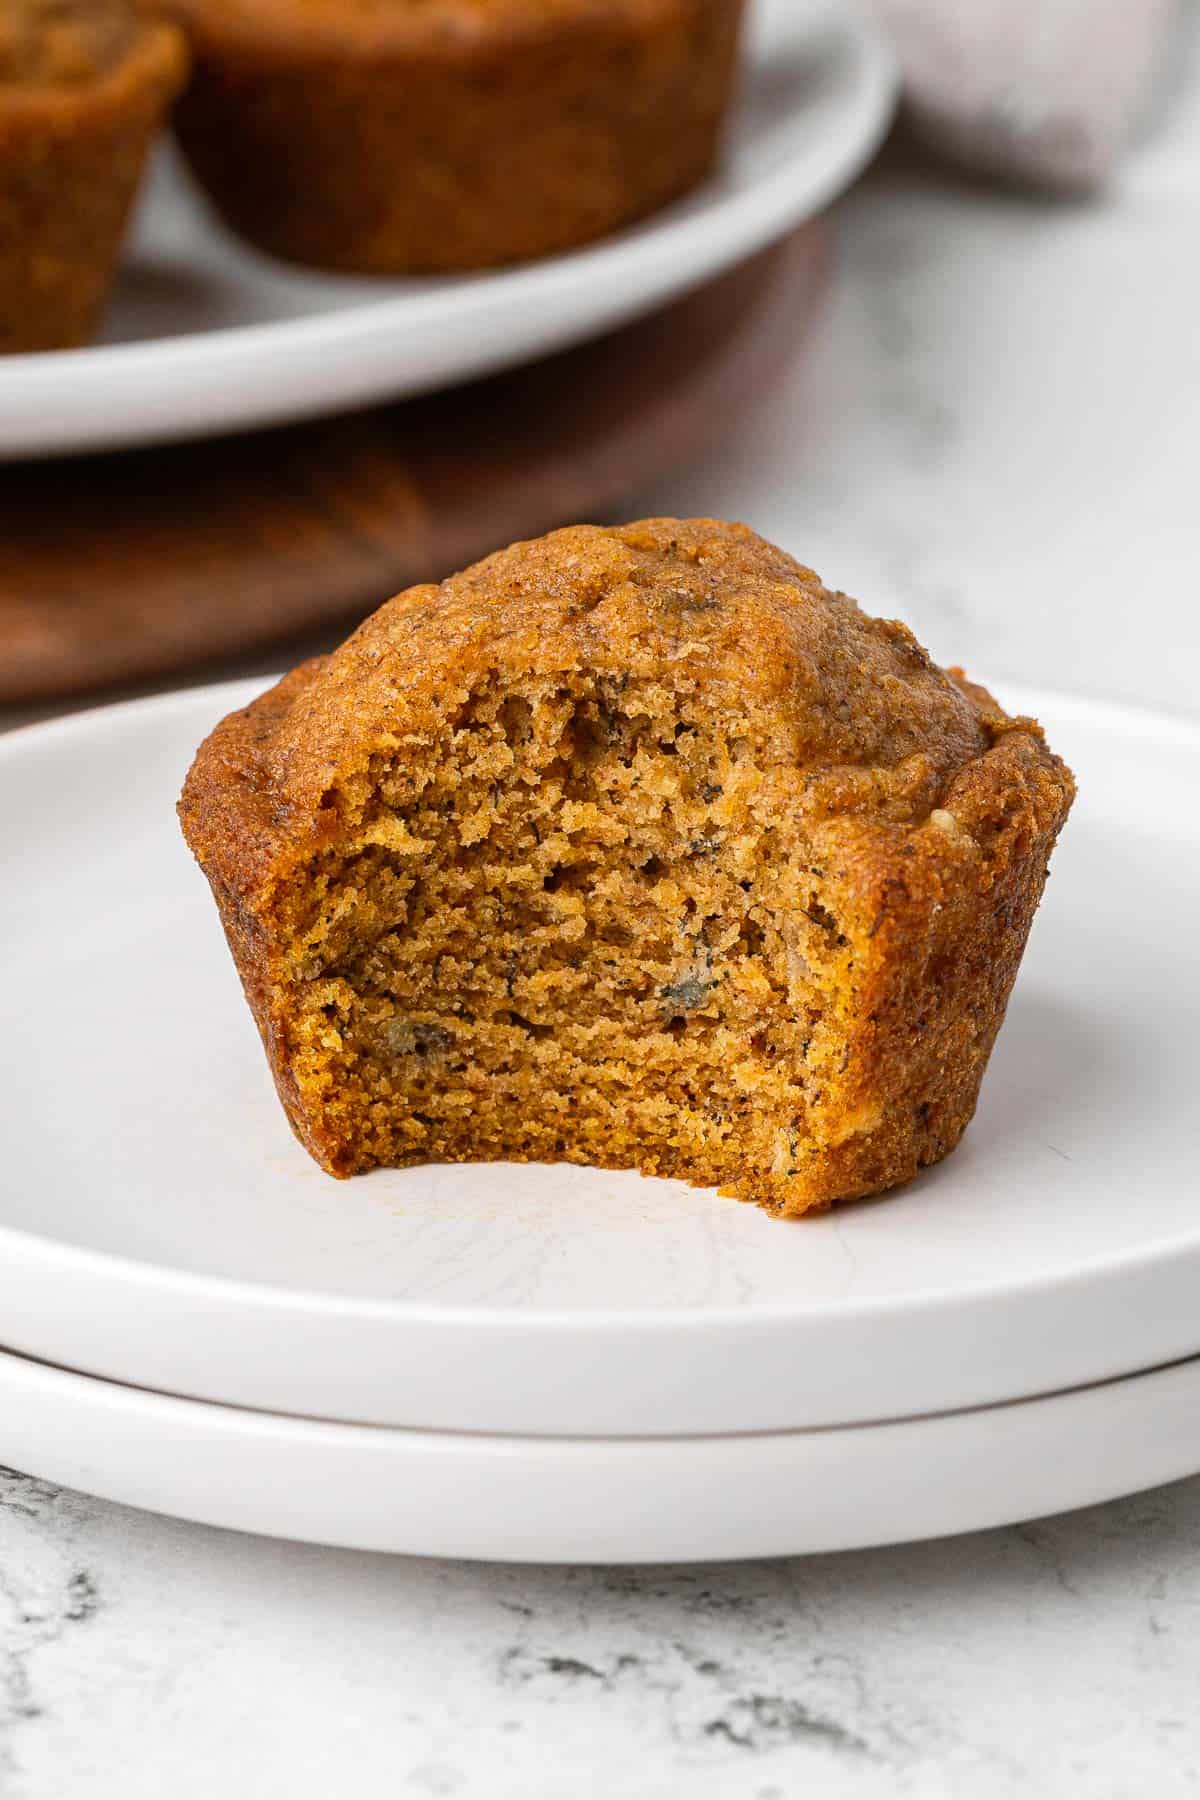 Pumpkin banana muffin on a small plate with a bite taken out to show inside texture.